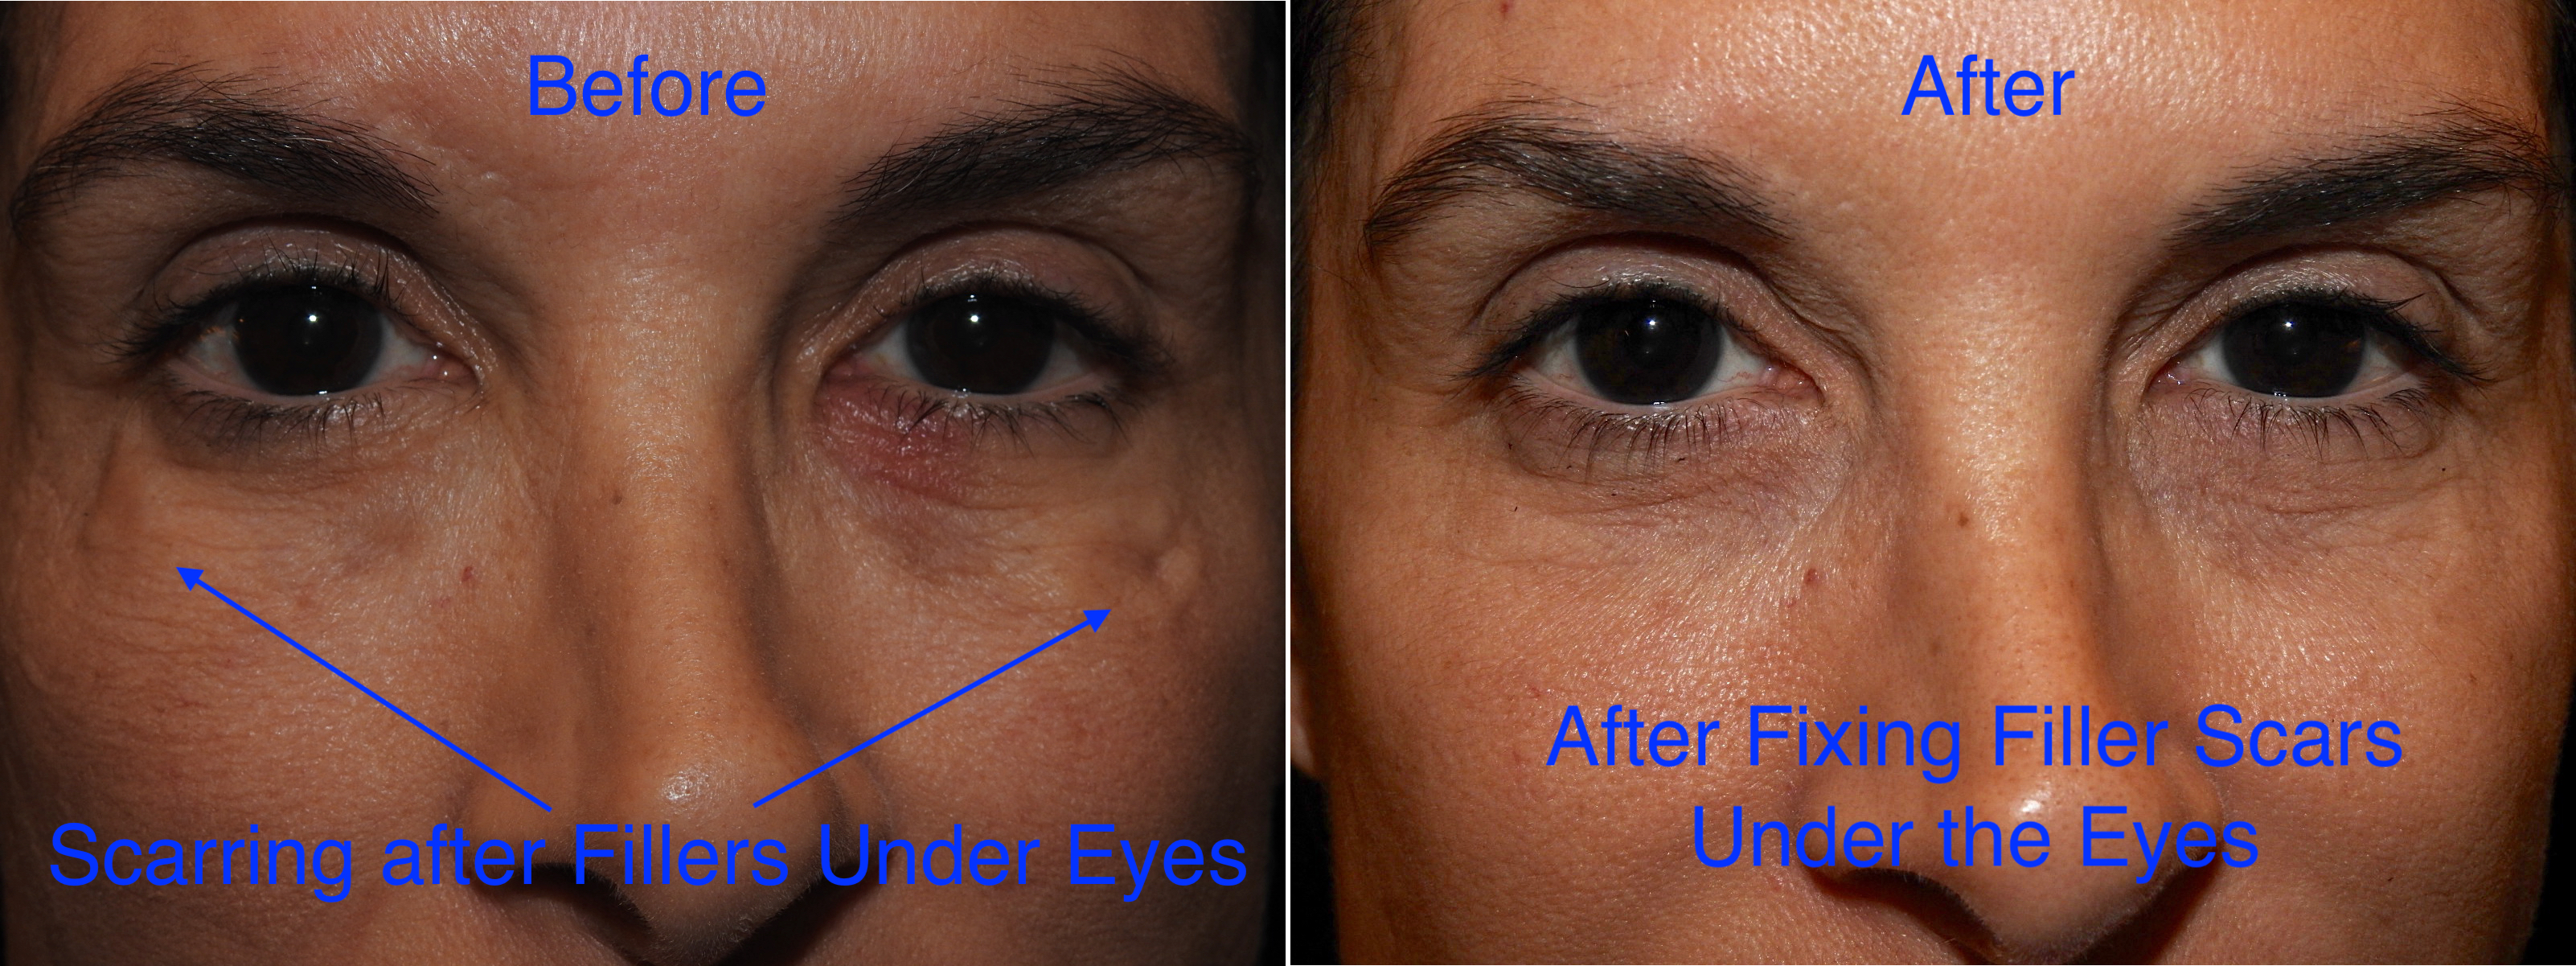 problems with fillers under the eyes 